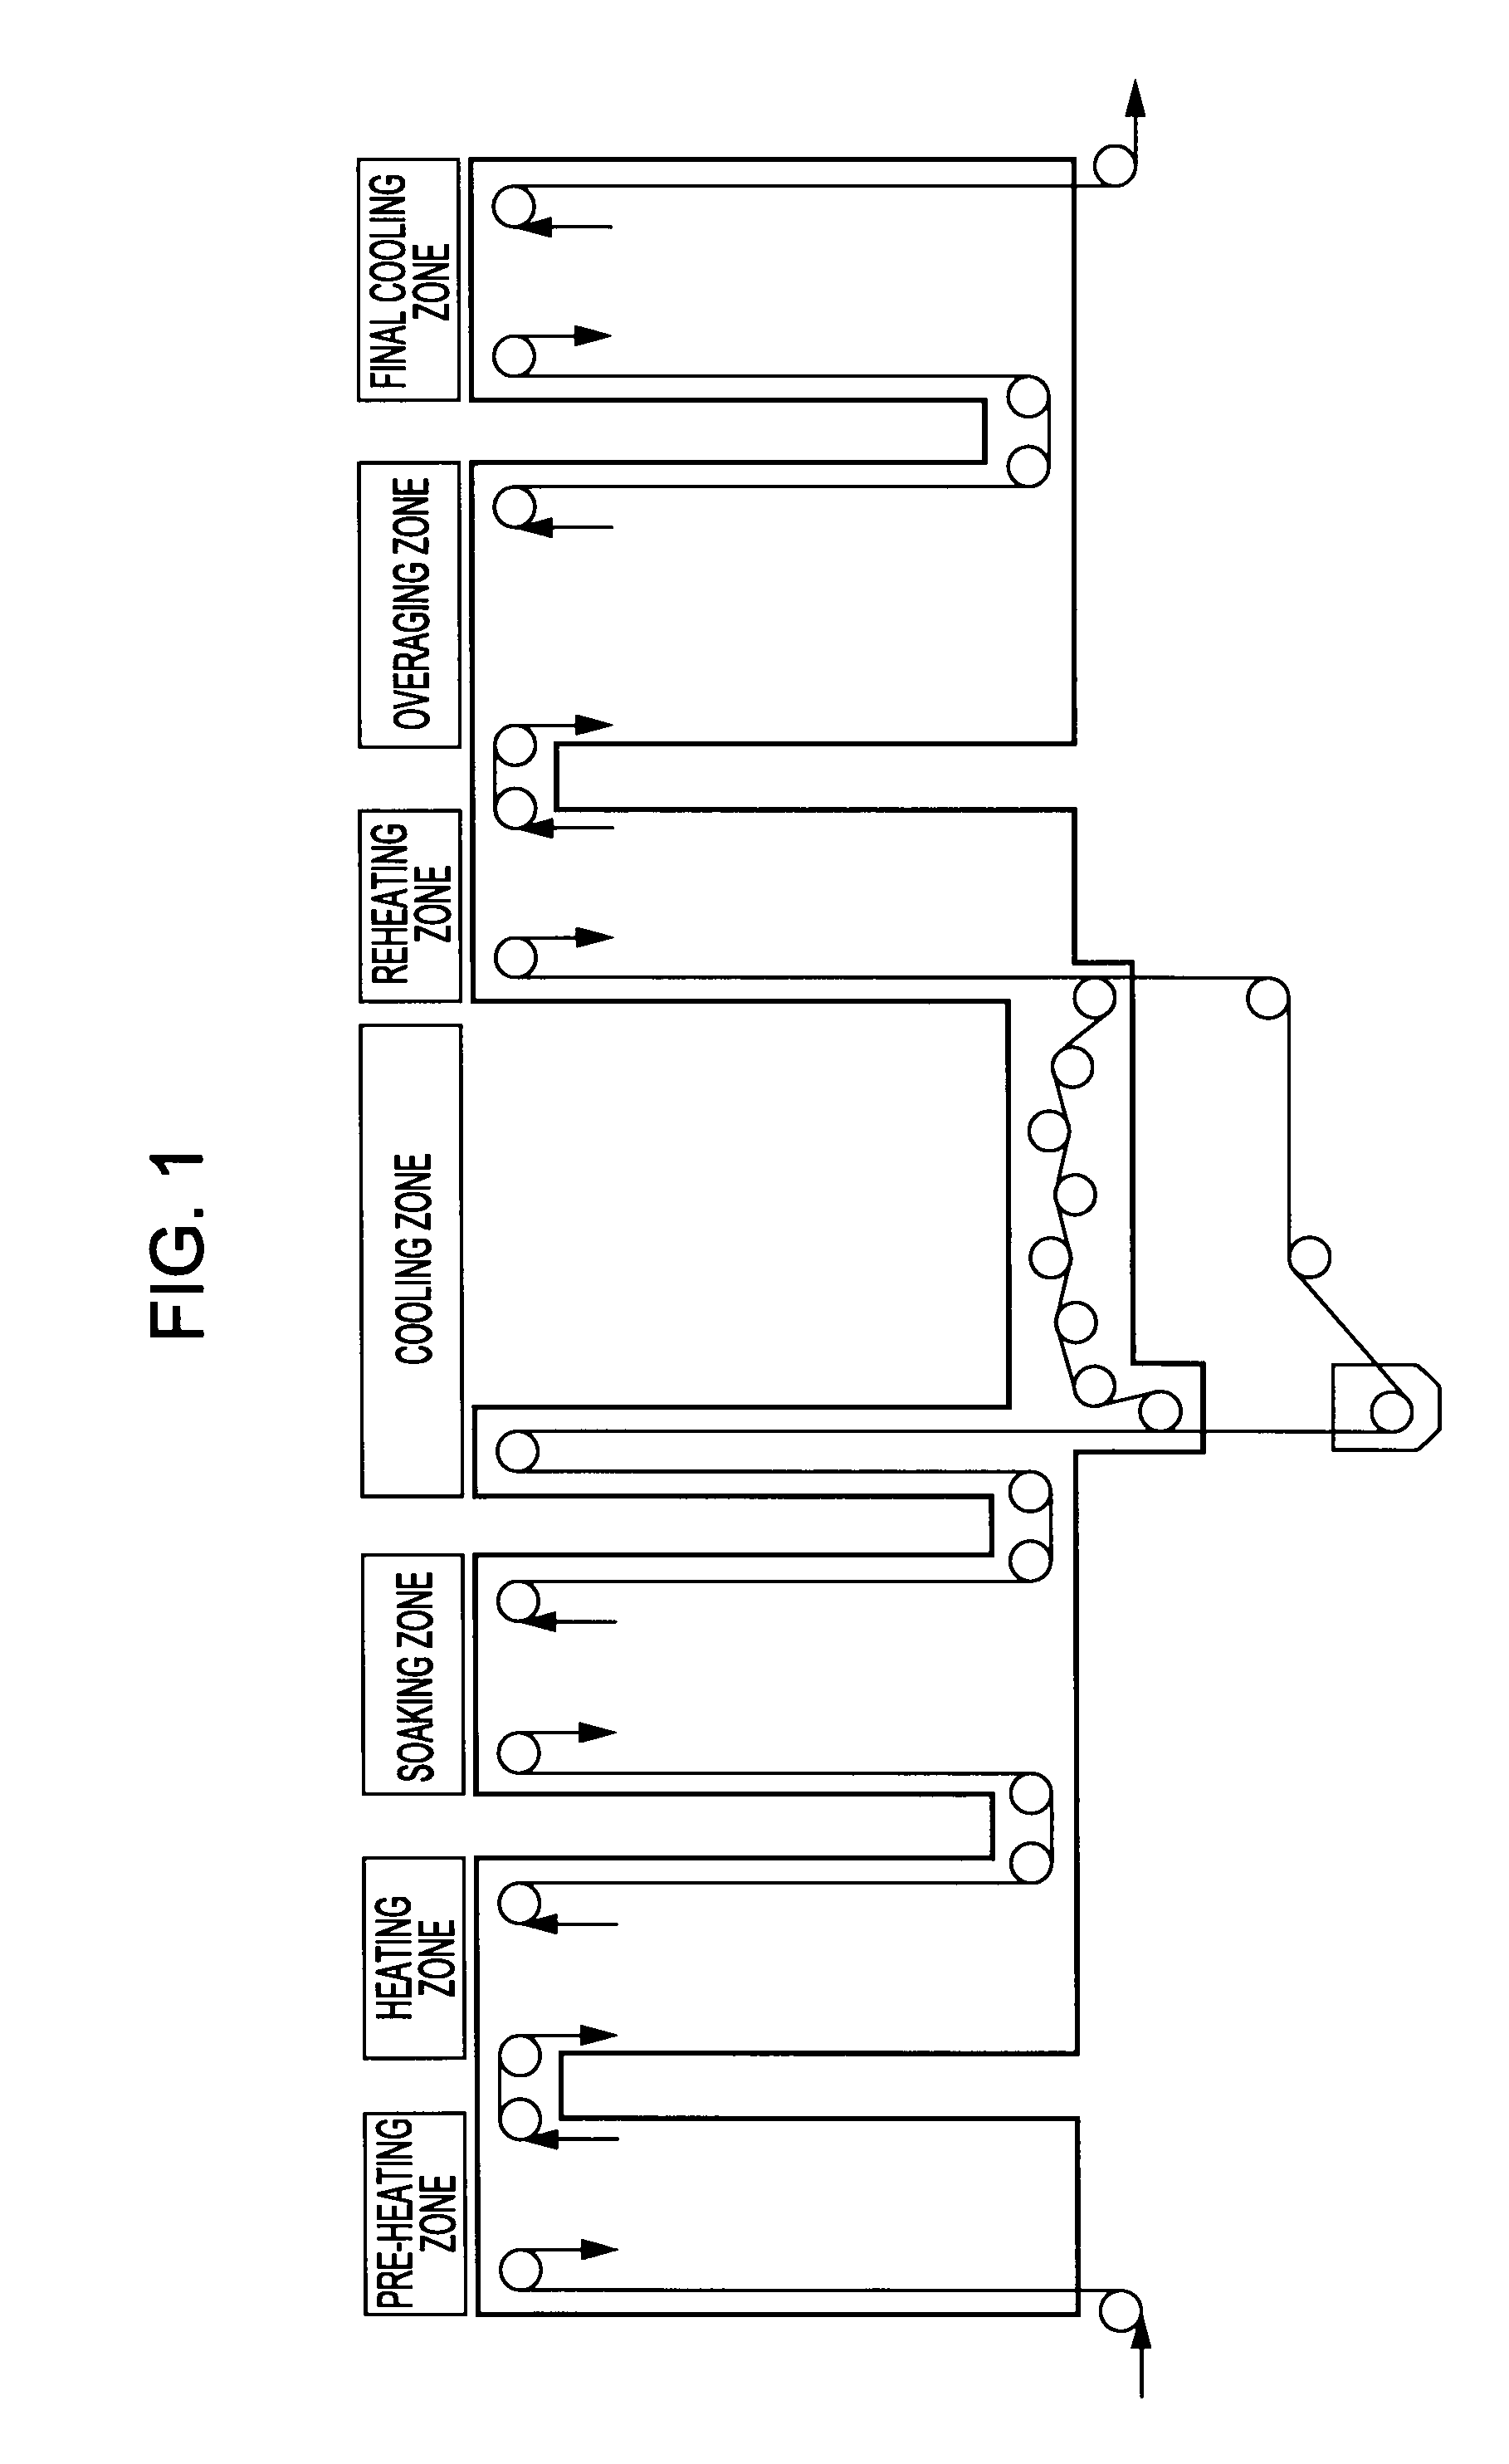 Steel-sheet continuous annealing equipment and method for operating steel-sheet continuous annealing equipment